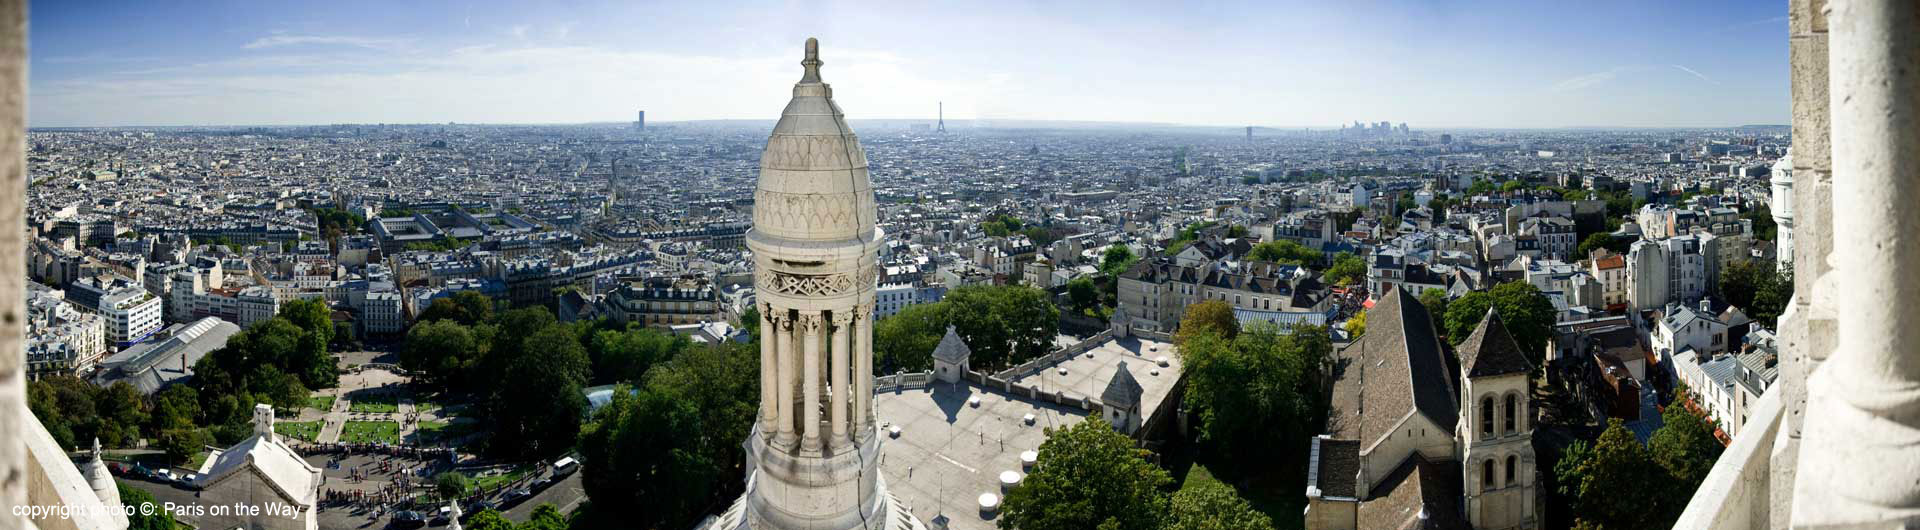 VIEW OF PARIS FROM THE SACRE COEUR BASILICA